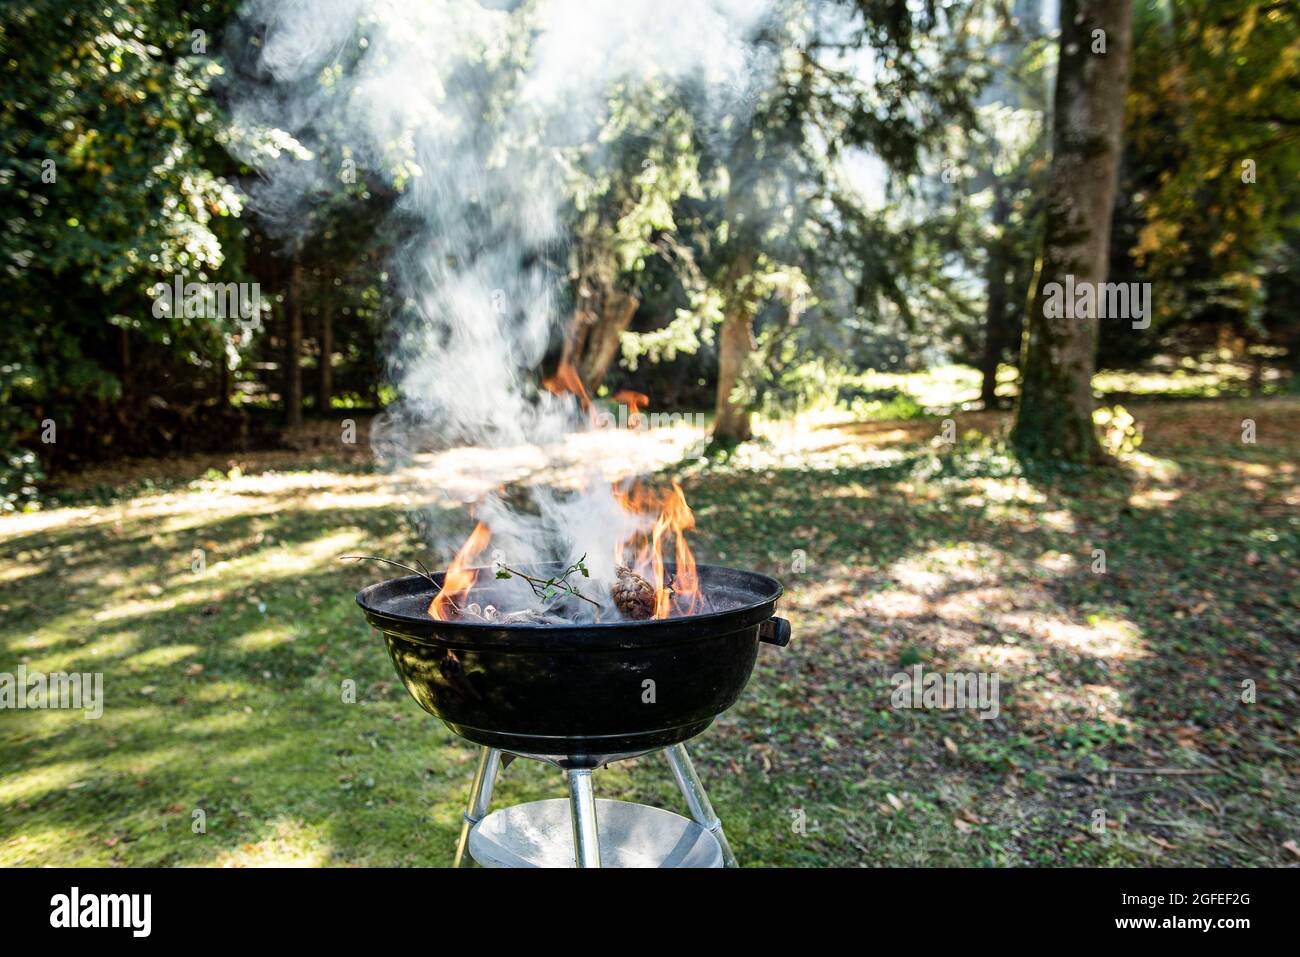 Barbecue grill in garden Stock Photo